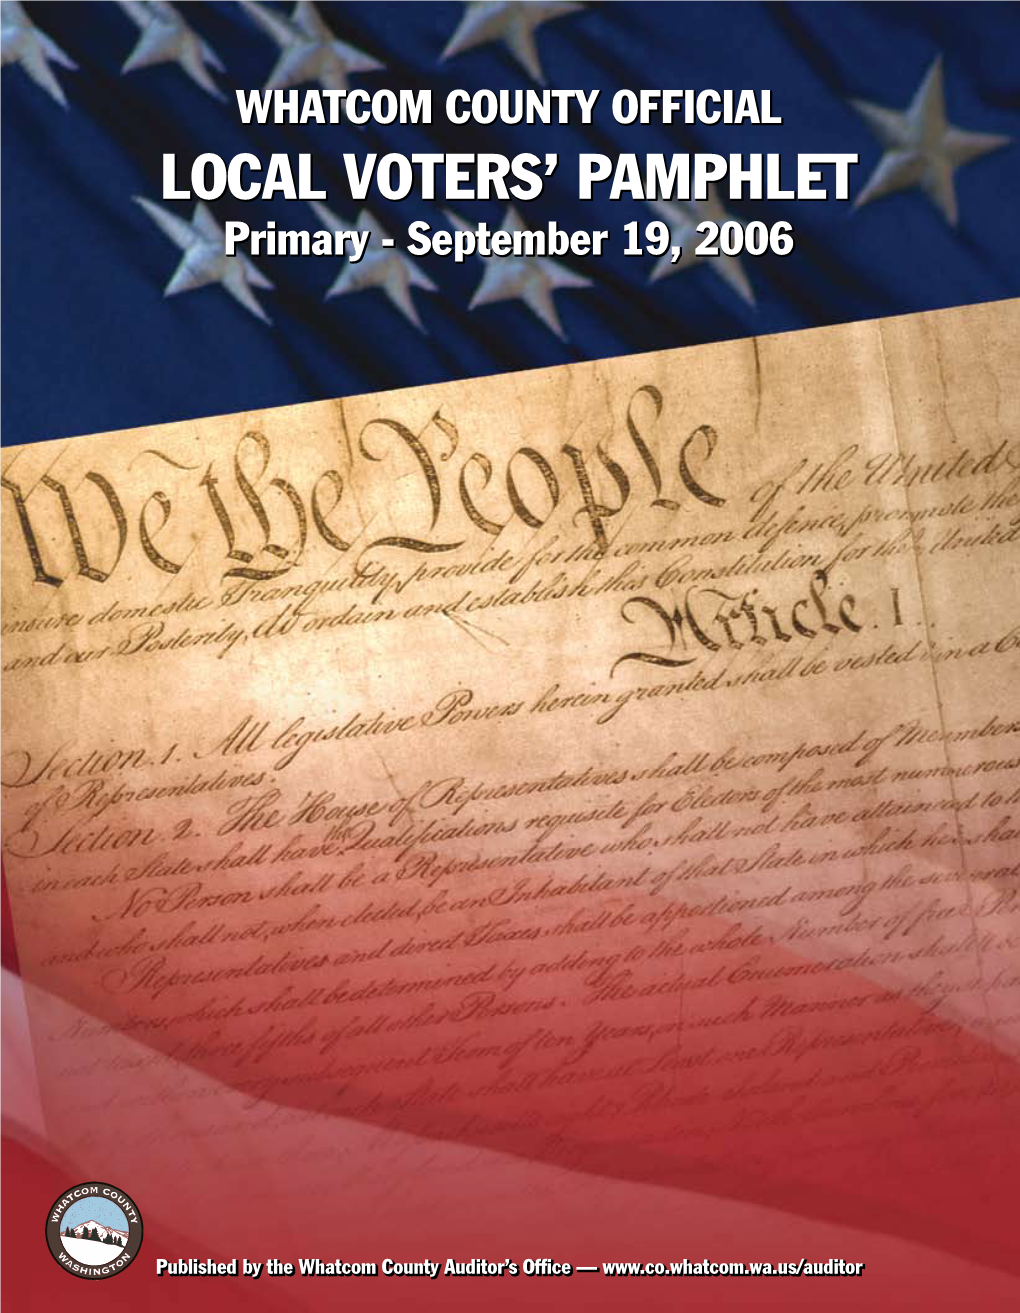 Local Voters' Pamphlet